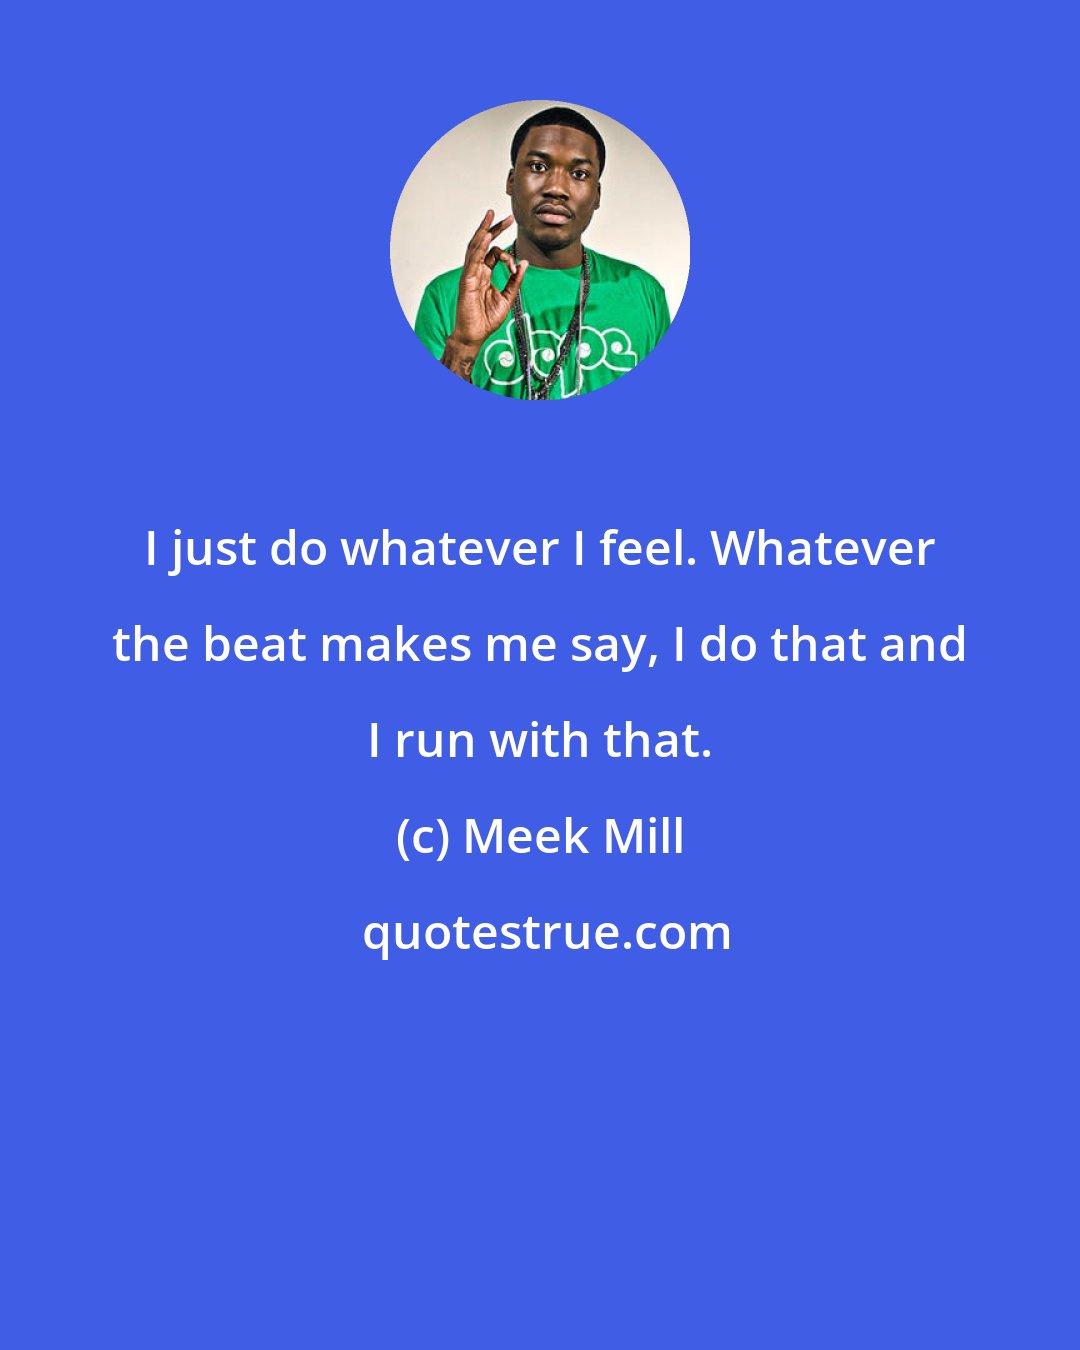 Meek Mill: I just do whatever I feel. Whatever the beat makes me say, I do that and I run with that.